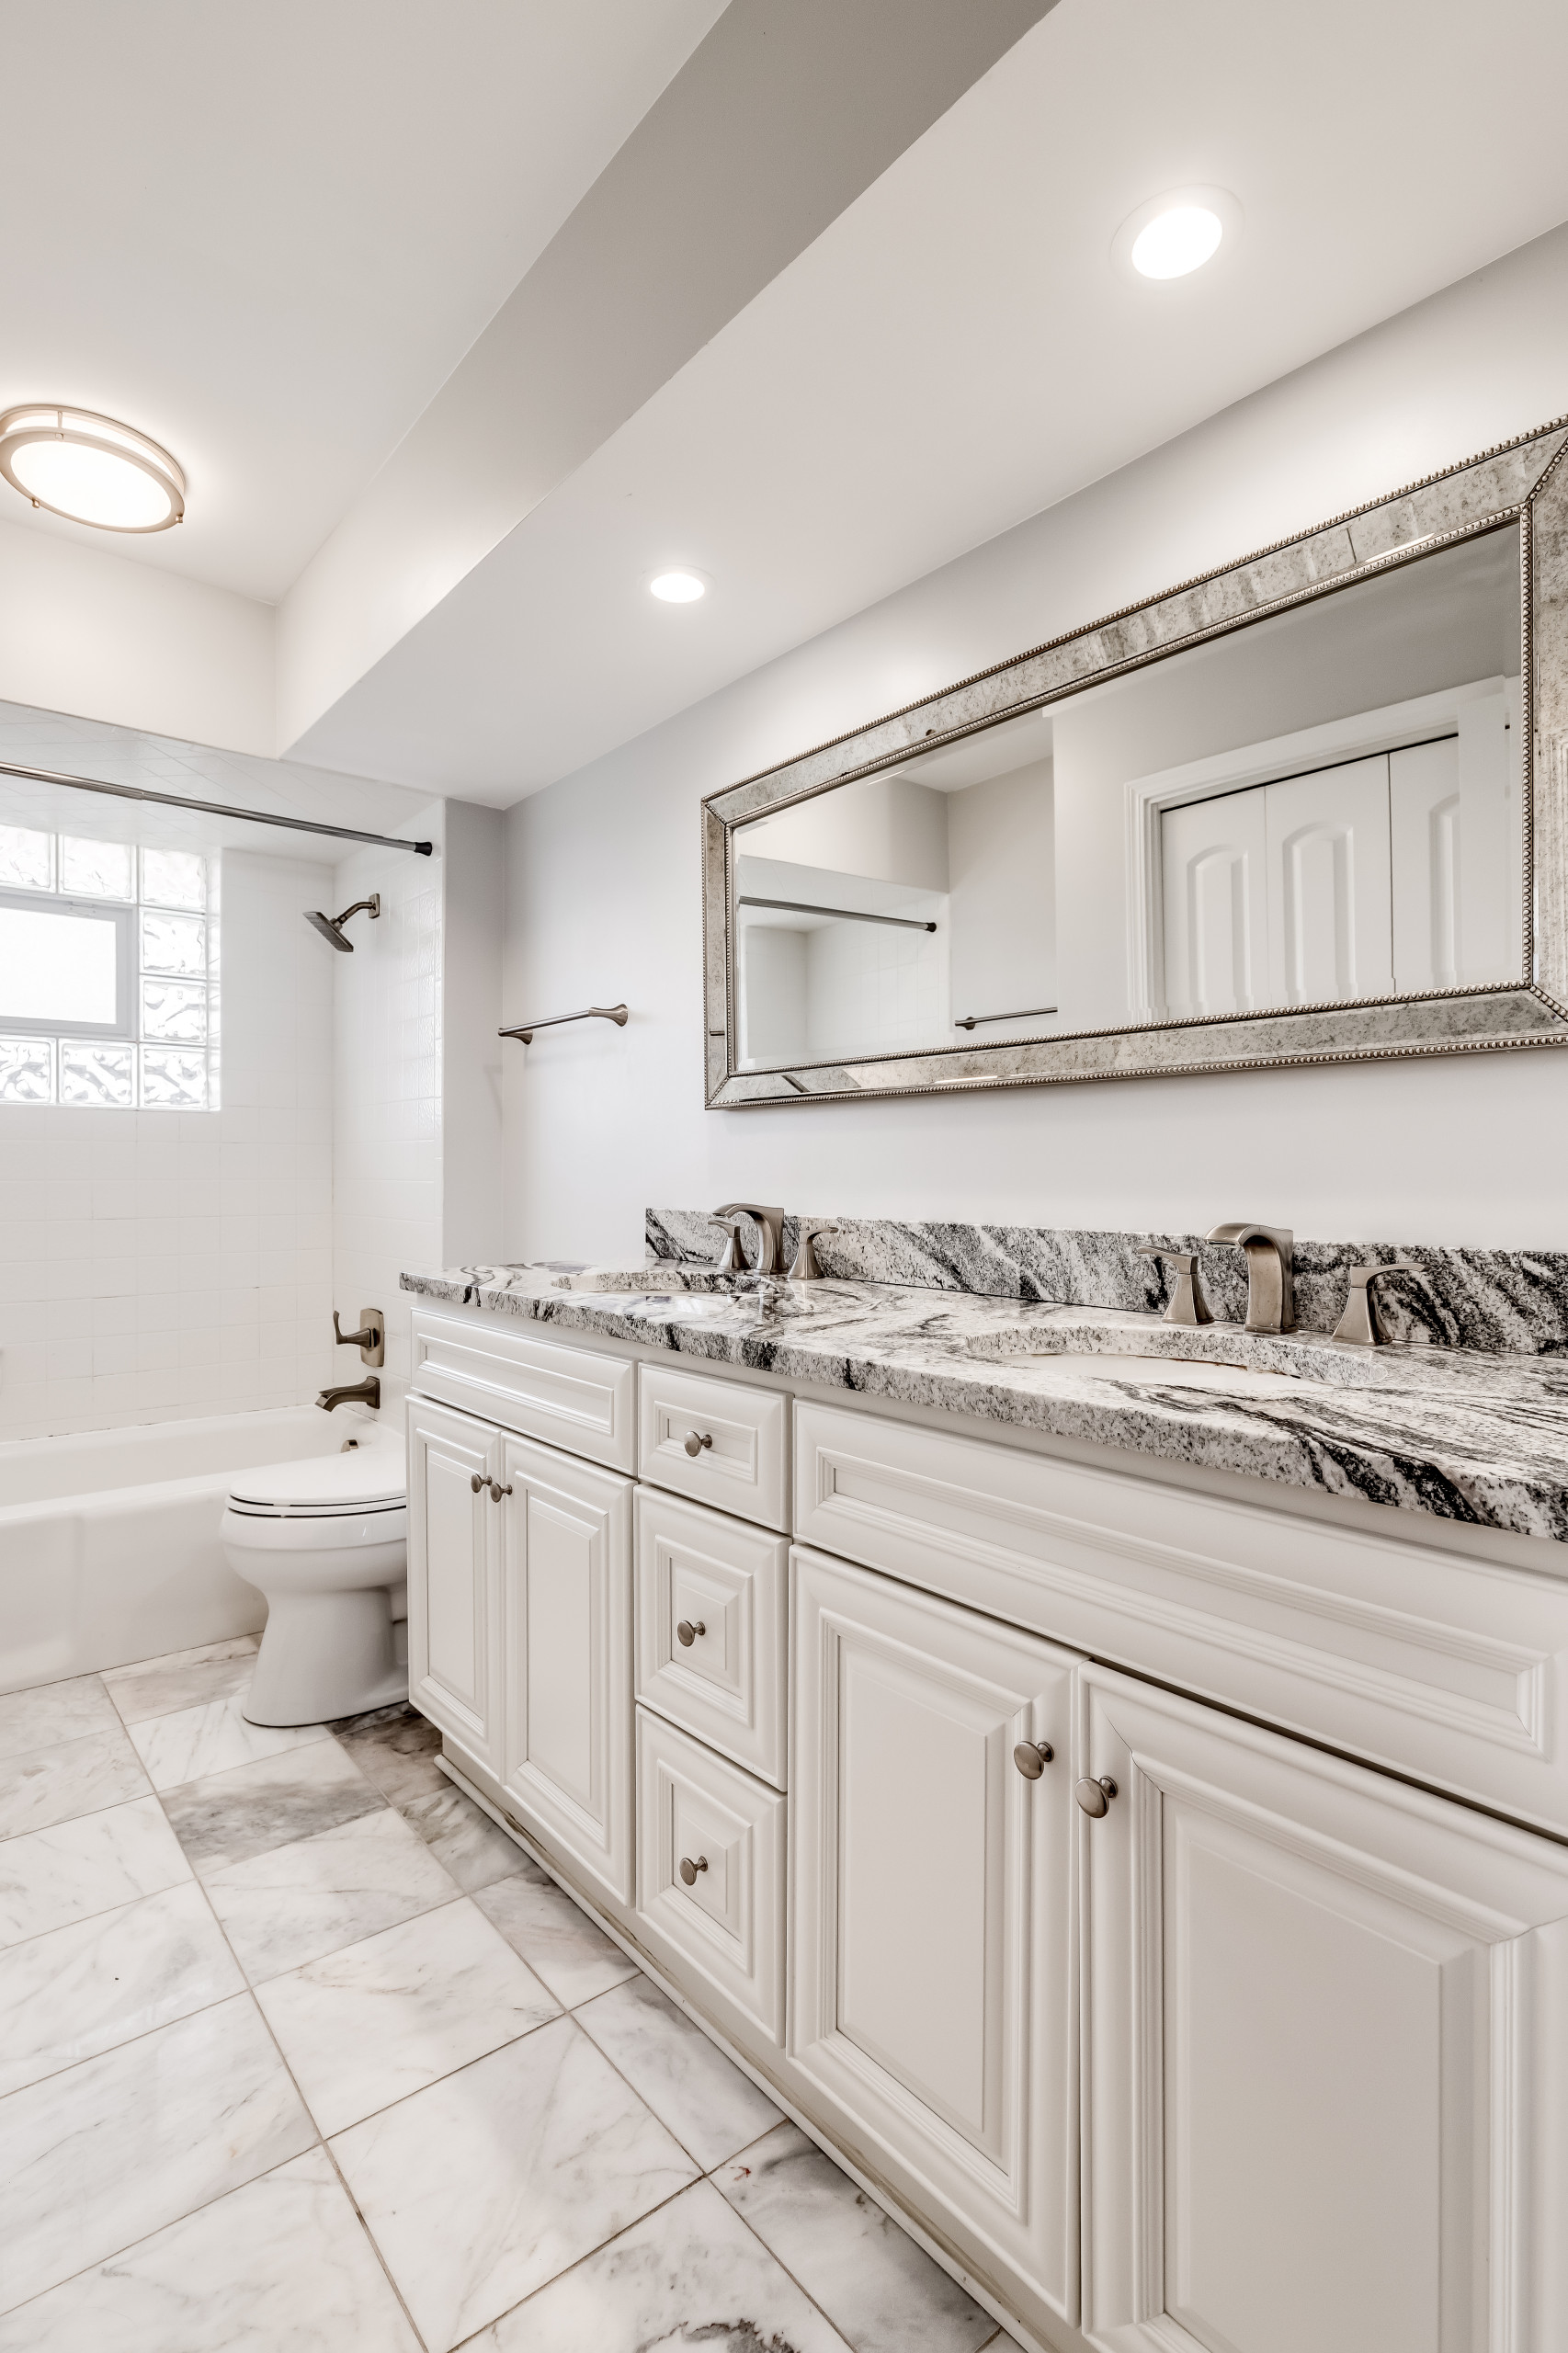 Kitchen & Bathroom Remodeling-Addition | Long Beach